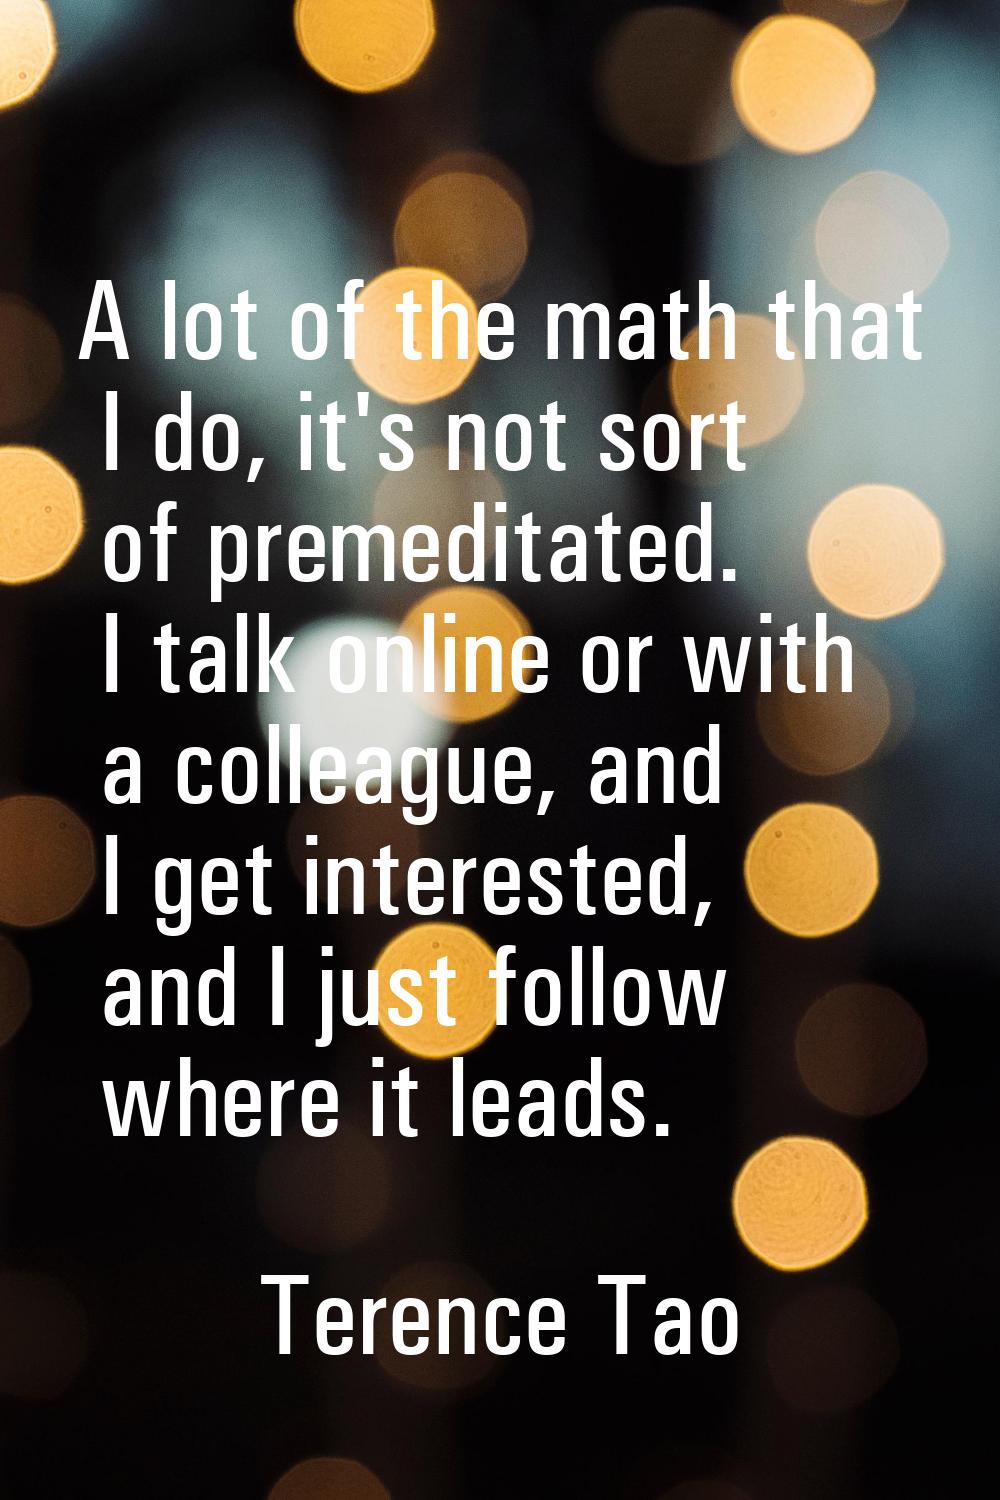 A lot of the math that I do, it's not sort of premeditated. I talk online or with a colleague, and 